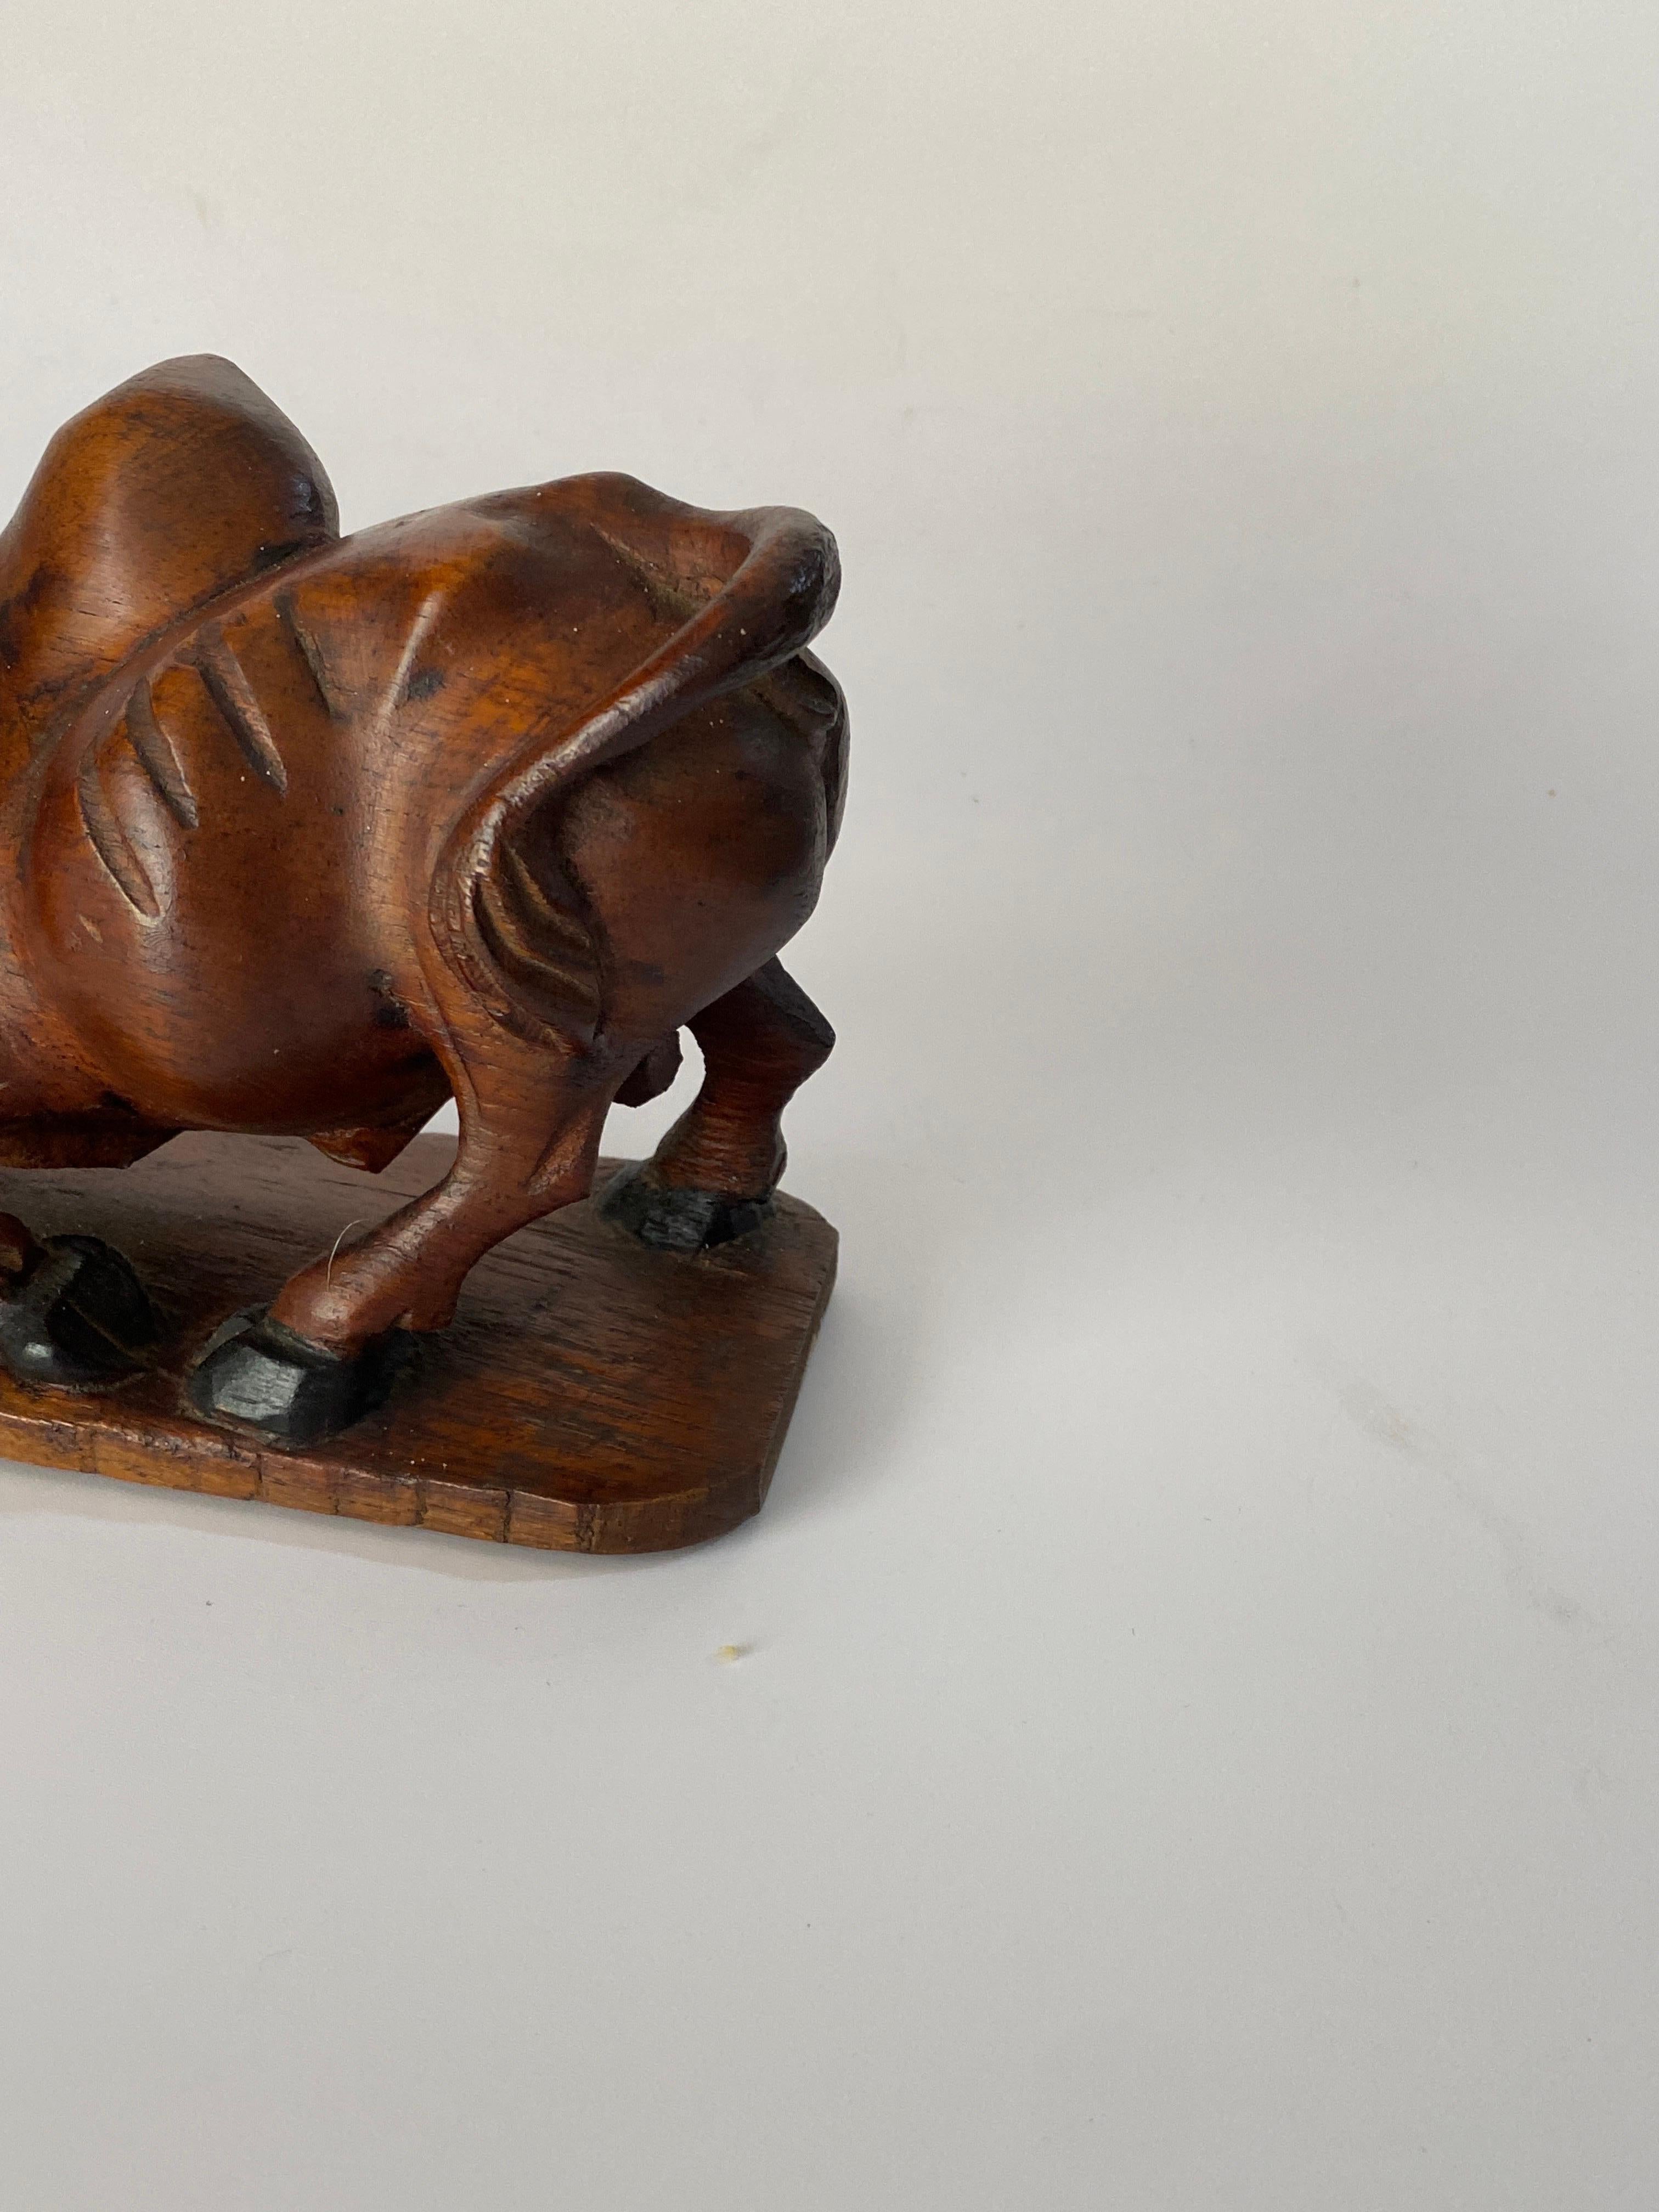 French Wood Sculpture Representing a Crocodile and a Bull Fighting, in Wood France 1930 For Sale